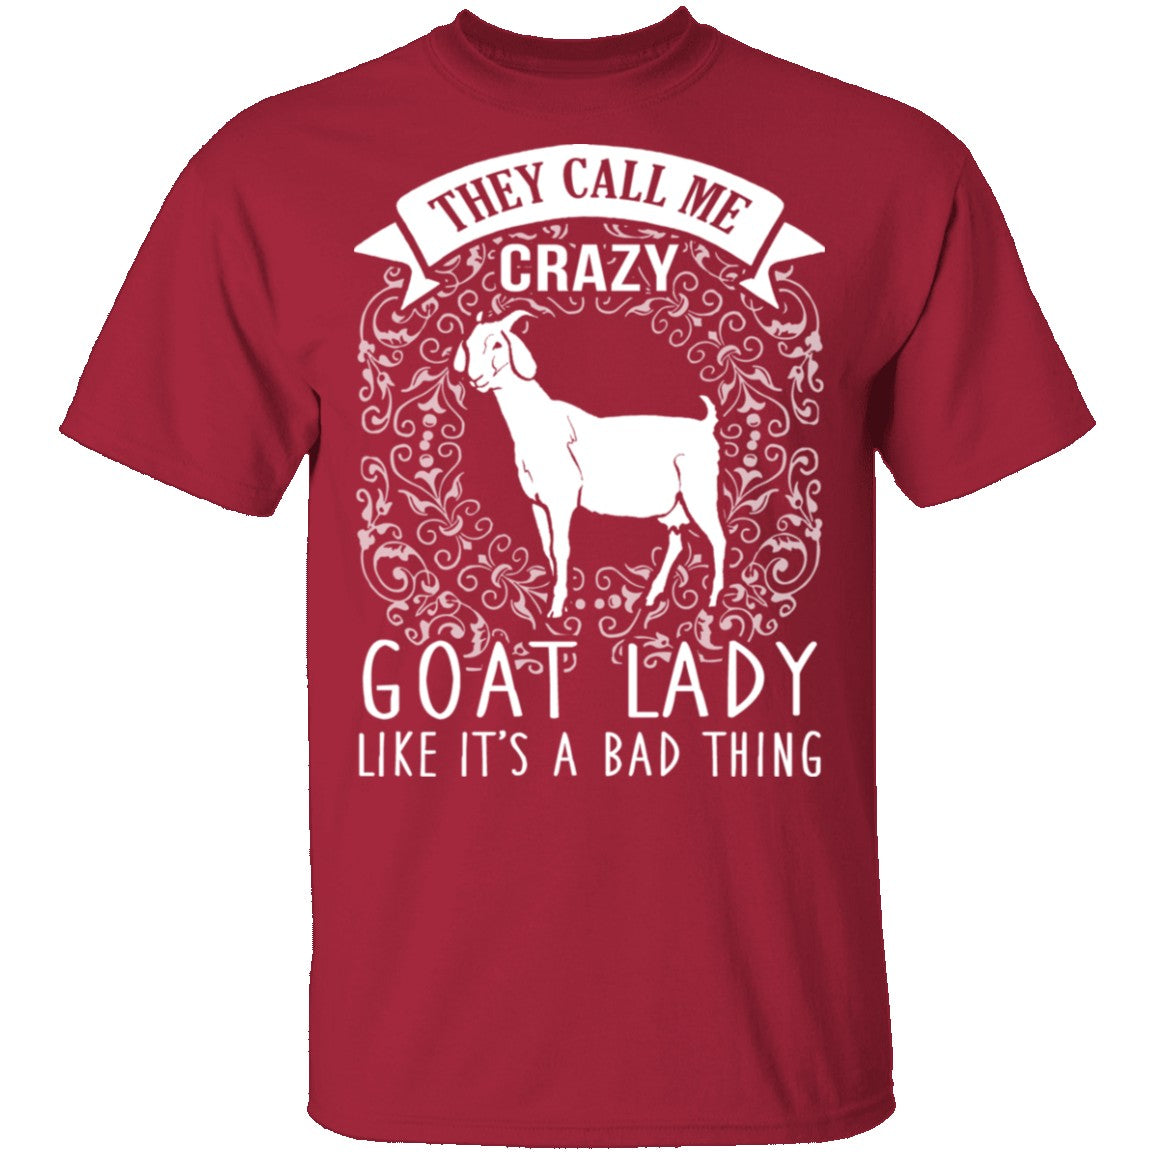 Crazy Goat Lady - T-Shirt | Gnarly Tees